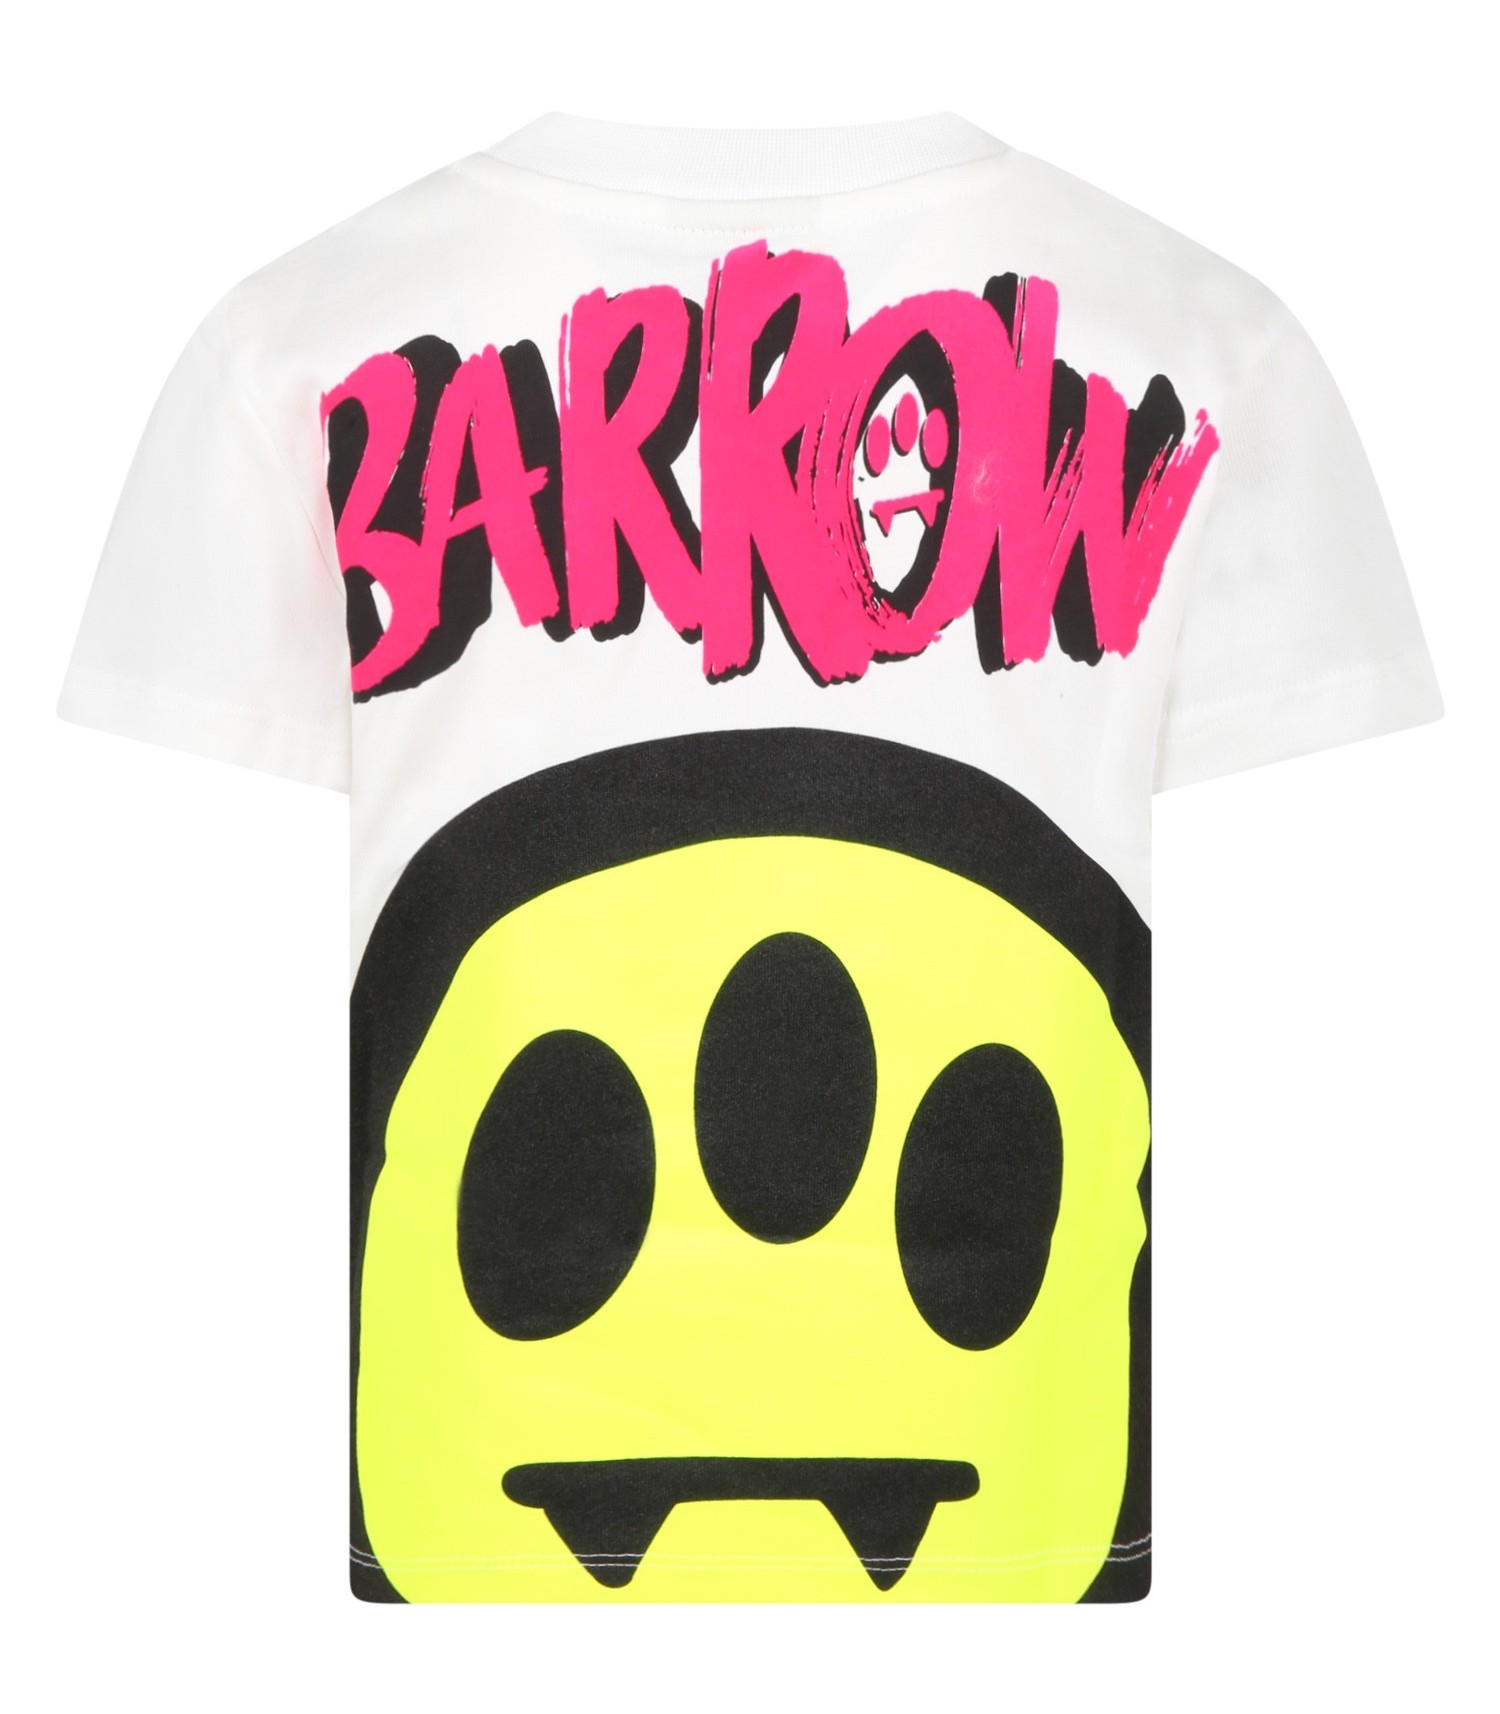 Barrow White t-shirt for kids with logo